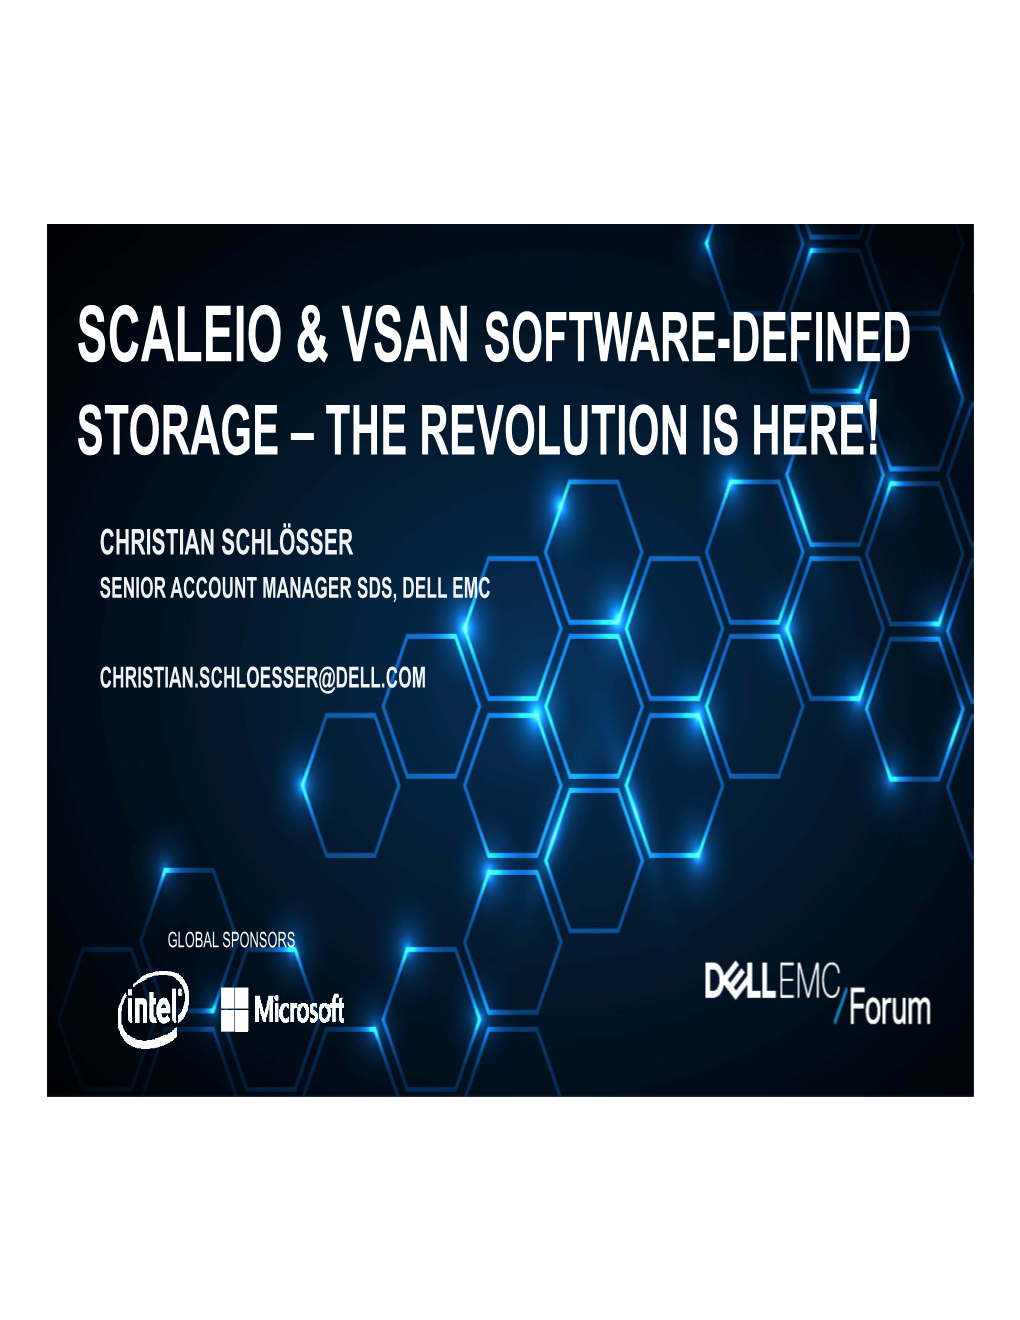 Scaleio & Vsan Software-Defined